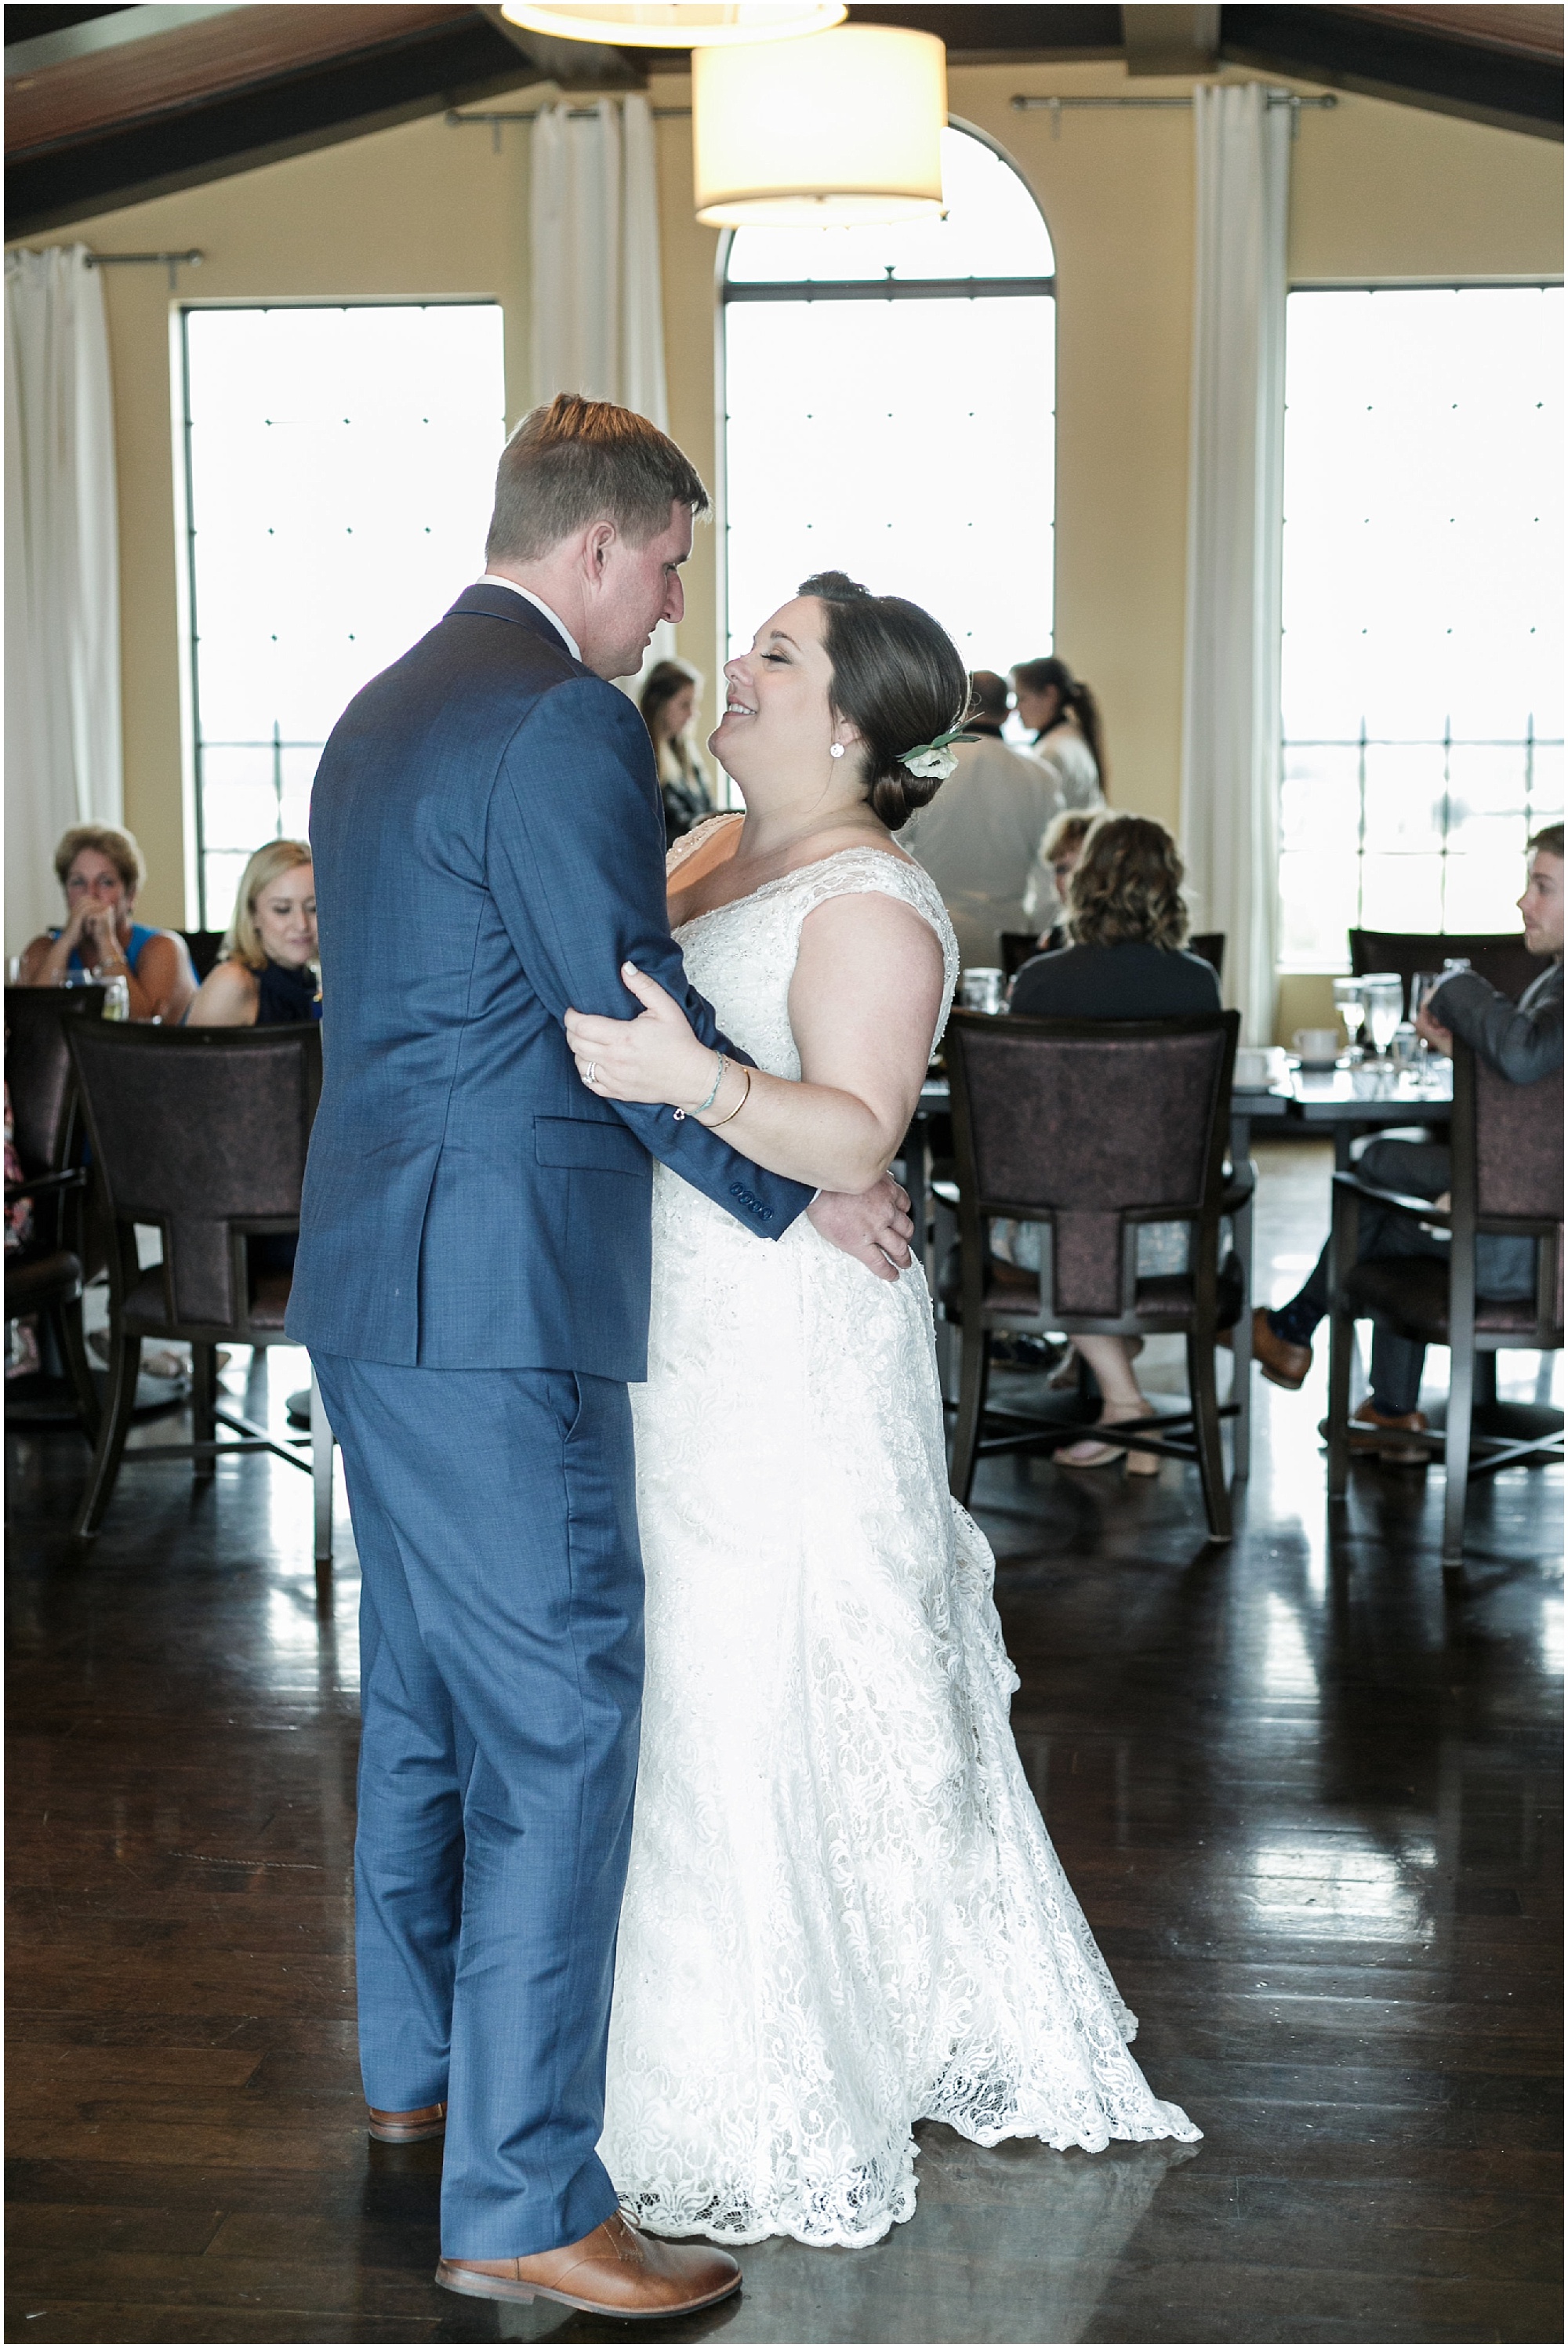 Bride and groom share their first dance as husband and wife at their rooftop reception. 